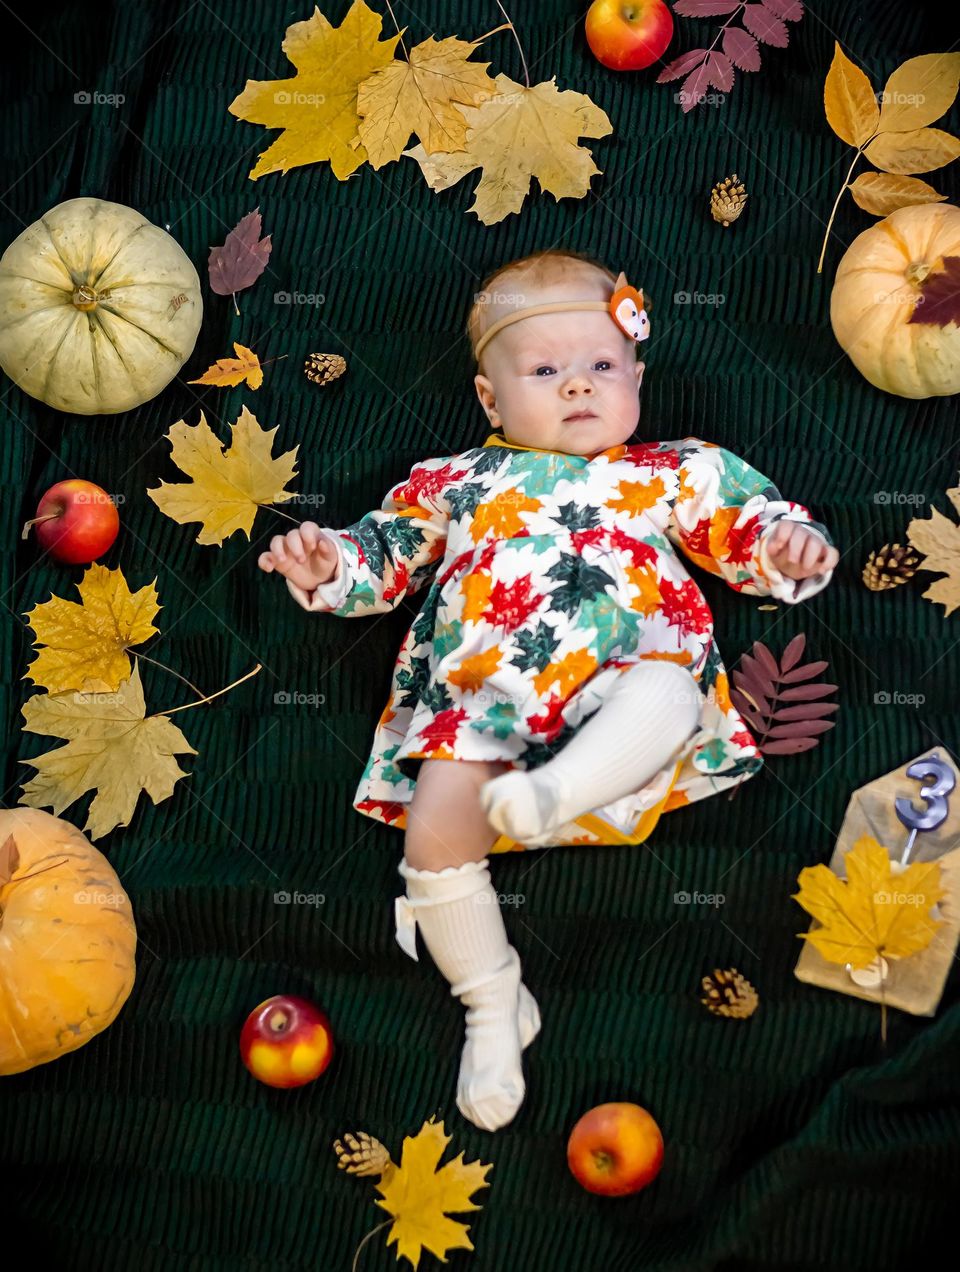 Autumn season top view child little girl in dress lies surrounded by pumpkins